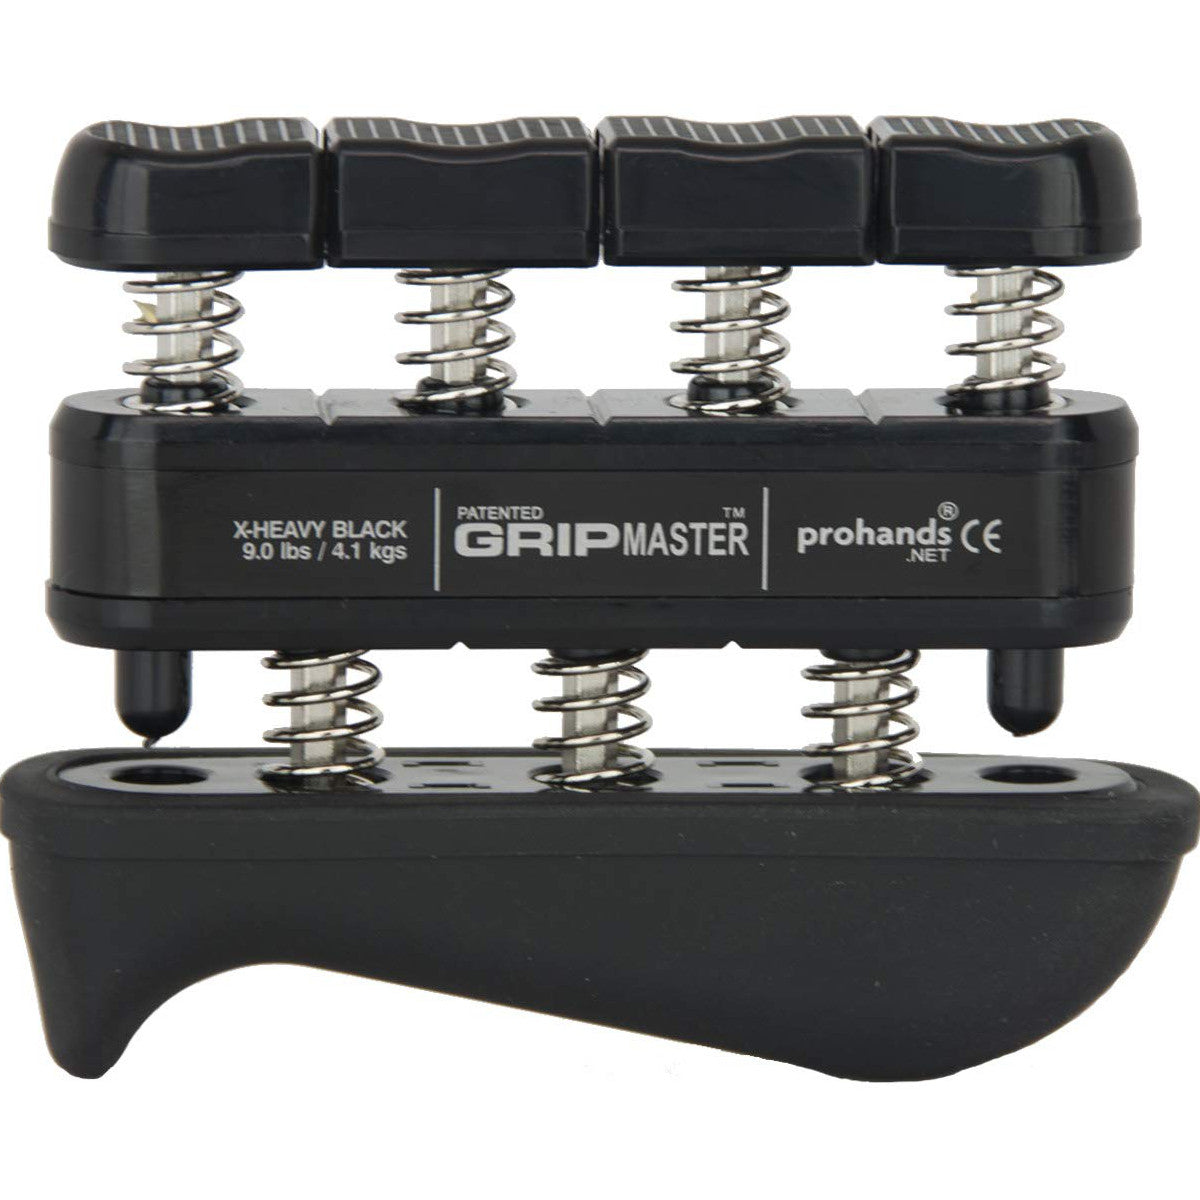 Gripmaster hand exerciser in black showing individual finger components and spring mechanism